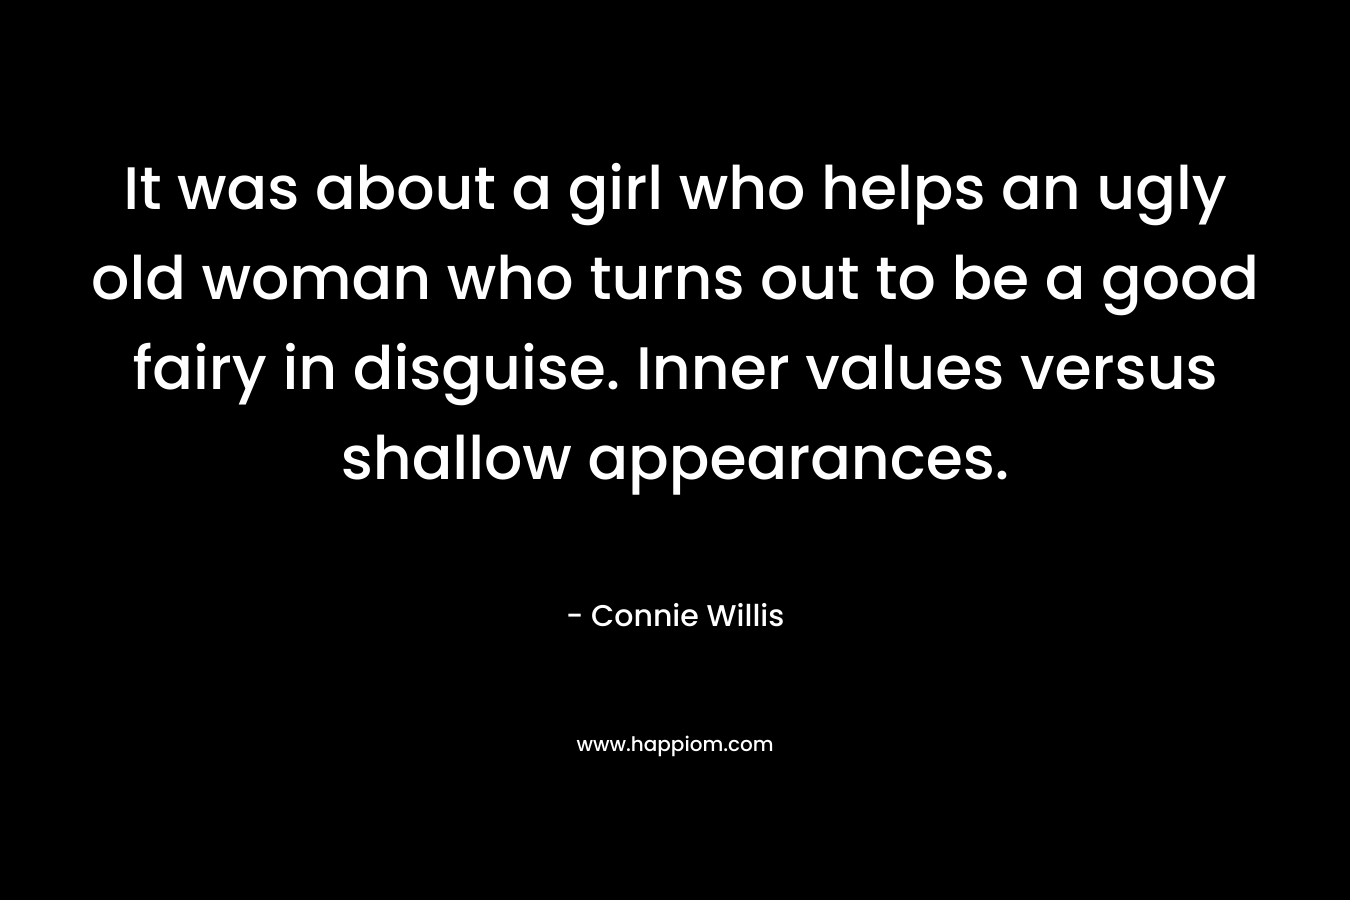 It was about a girl who helps an ugly old woman who turns out to be a good fairy in disguise. Inner values versus shallow appearances. – Connie Willis